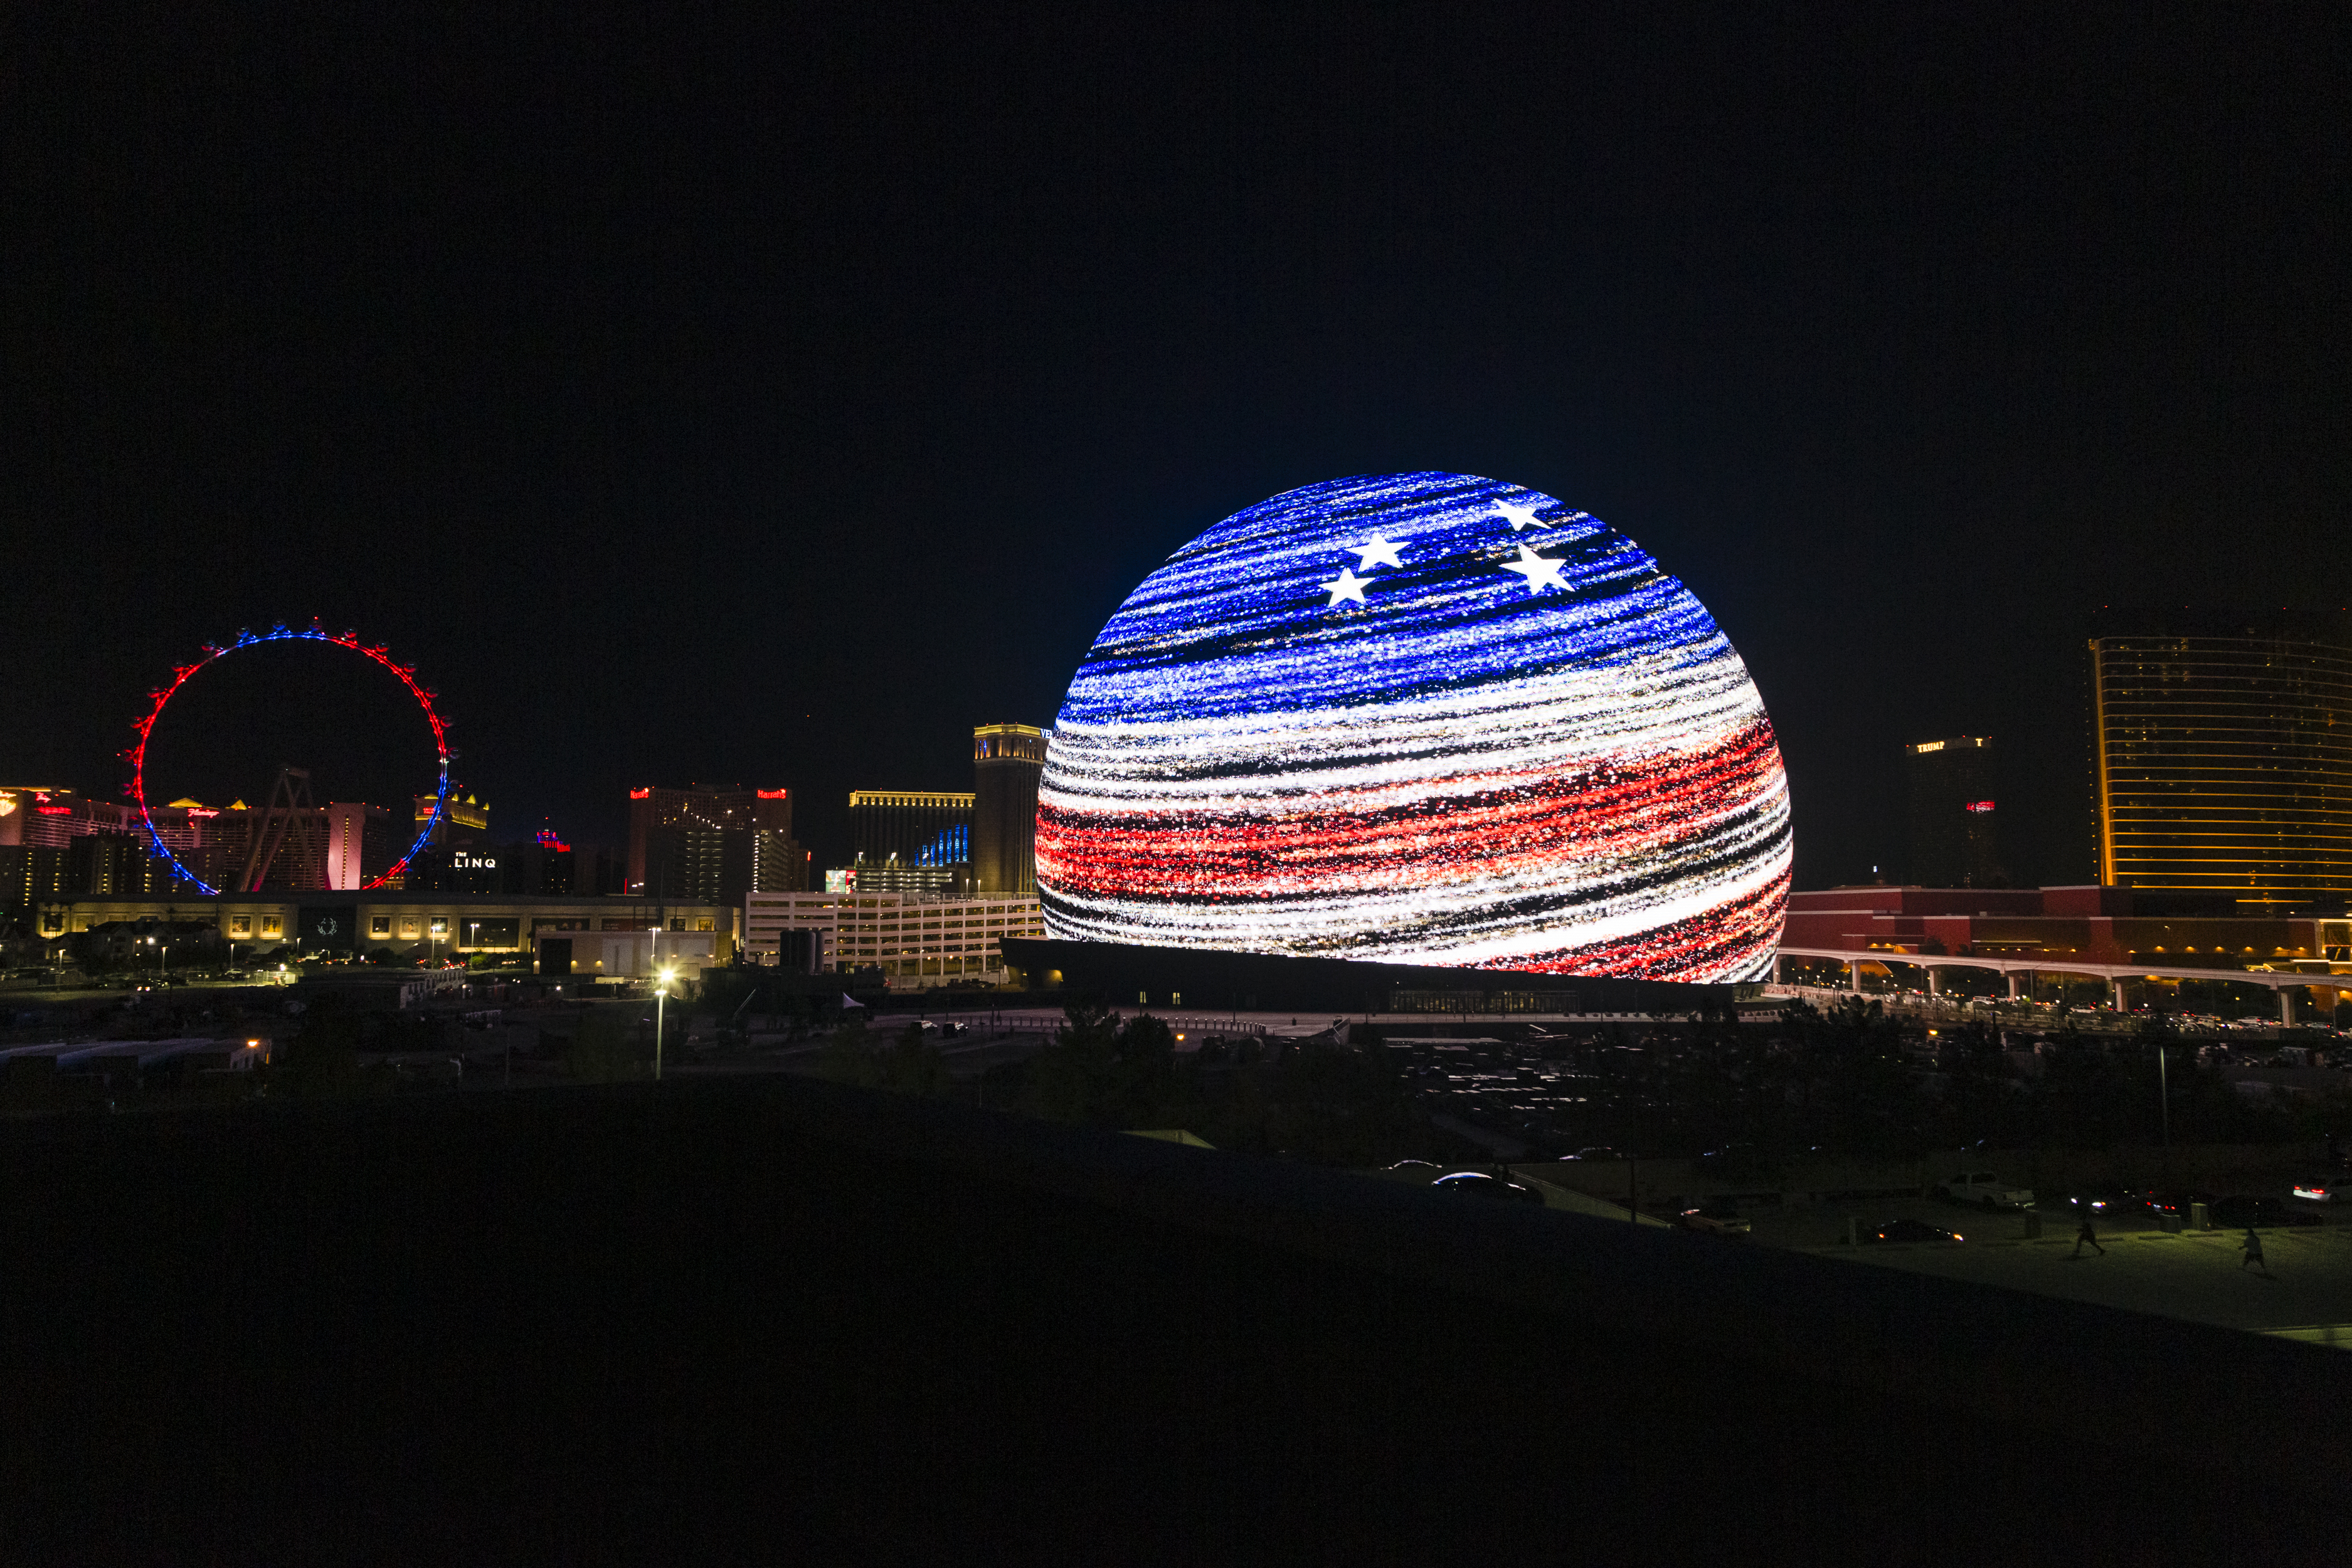 Sphere Las Vegas debuts largest LED screen in the world